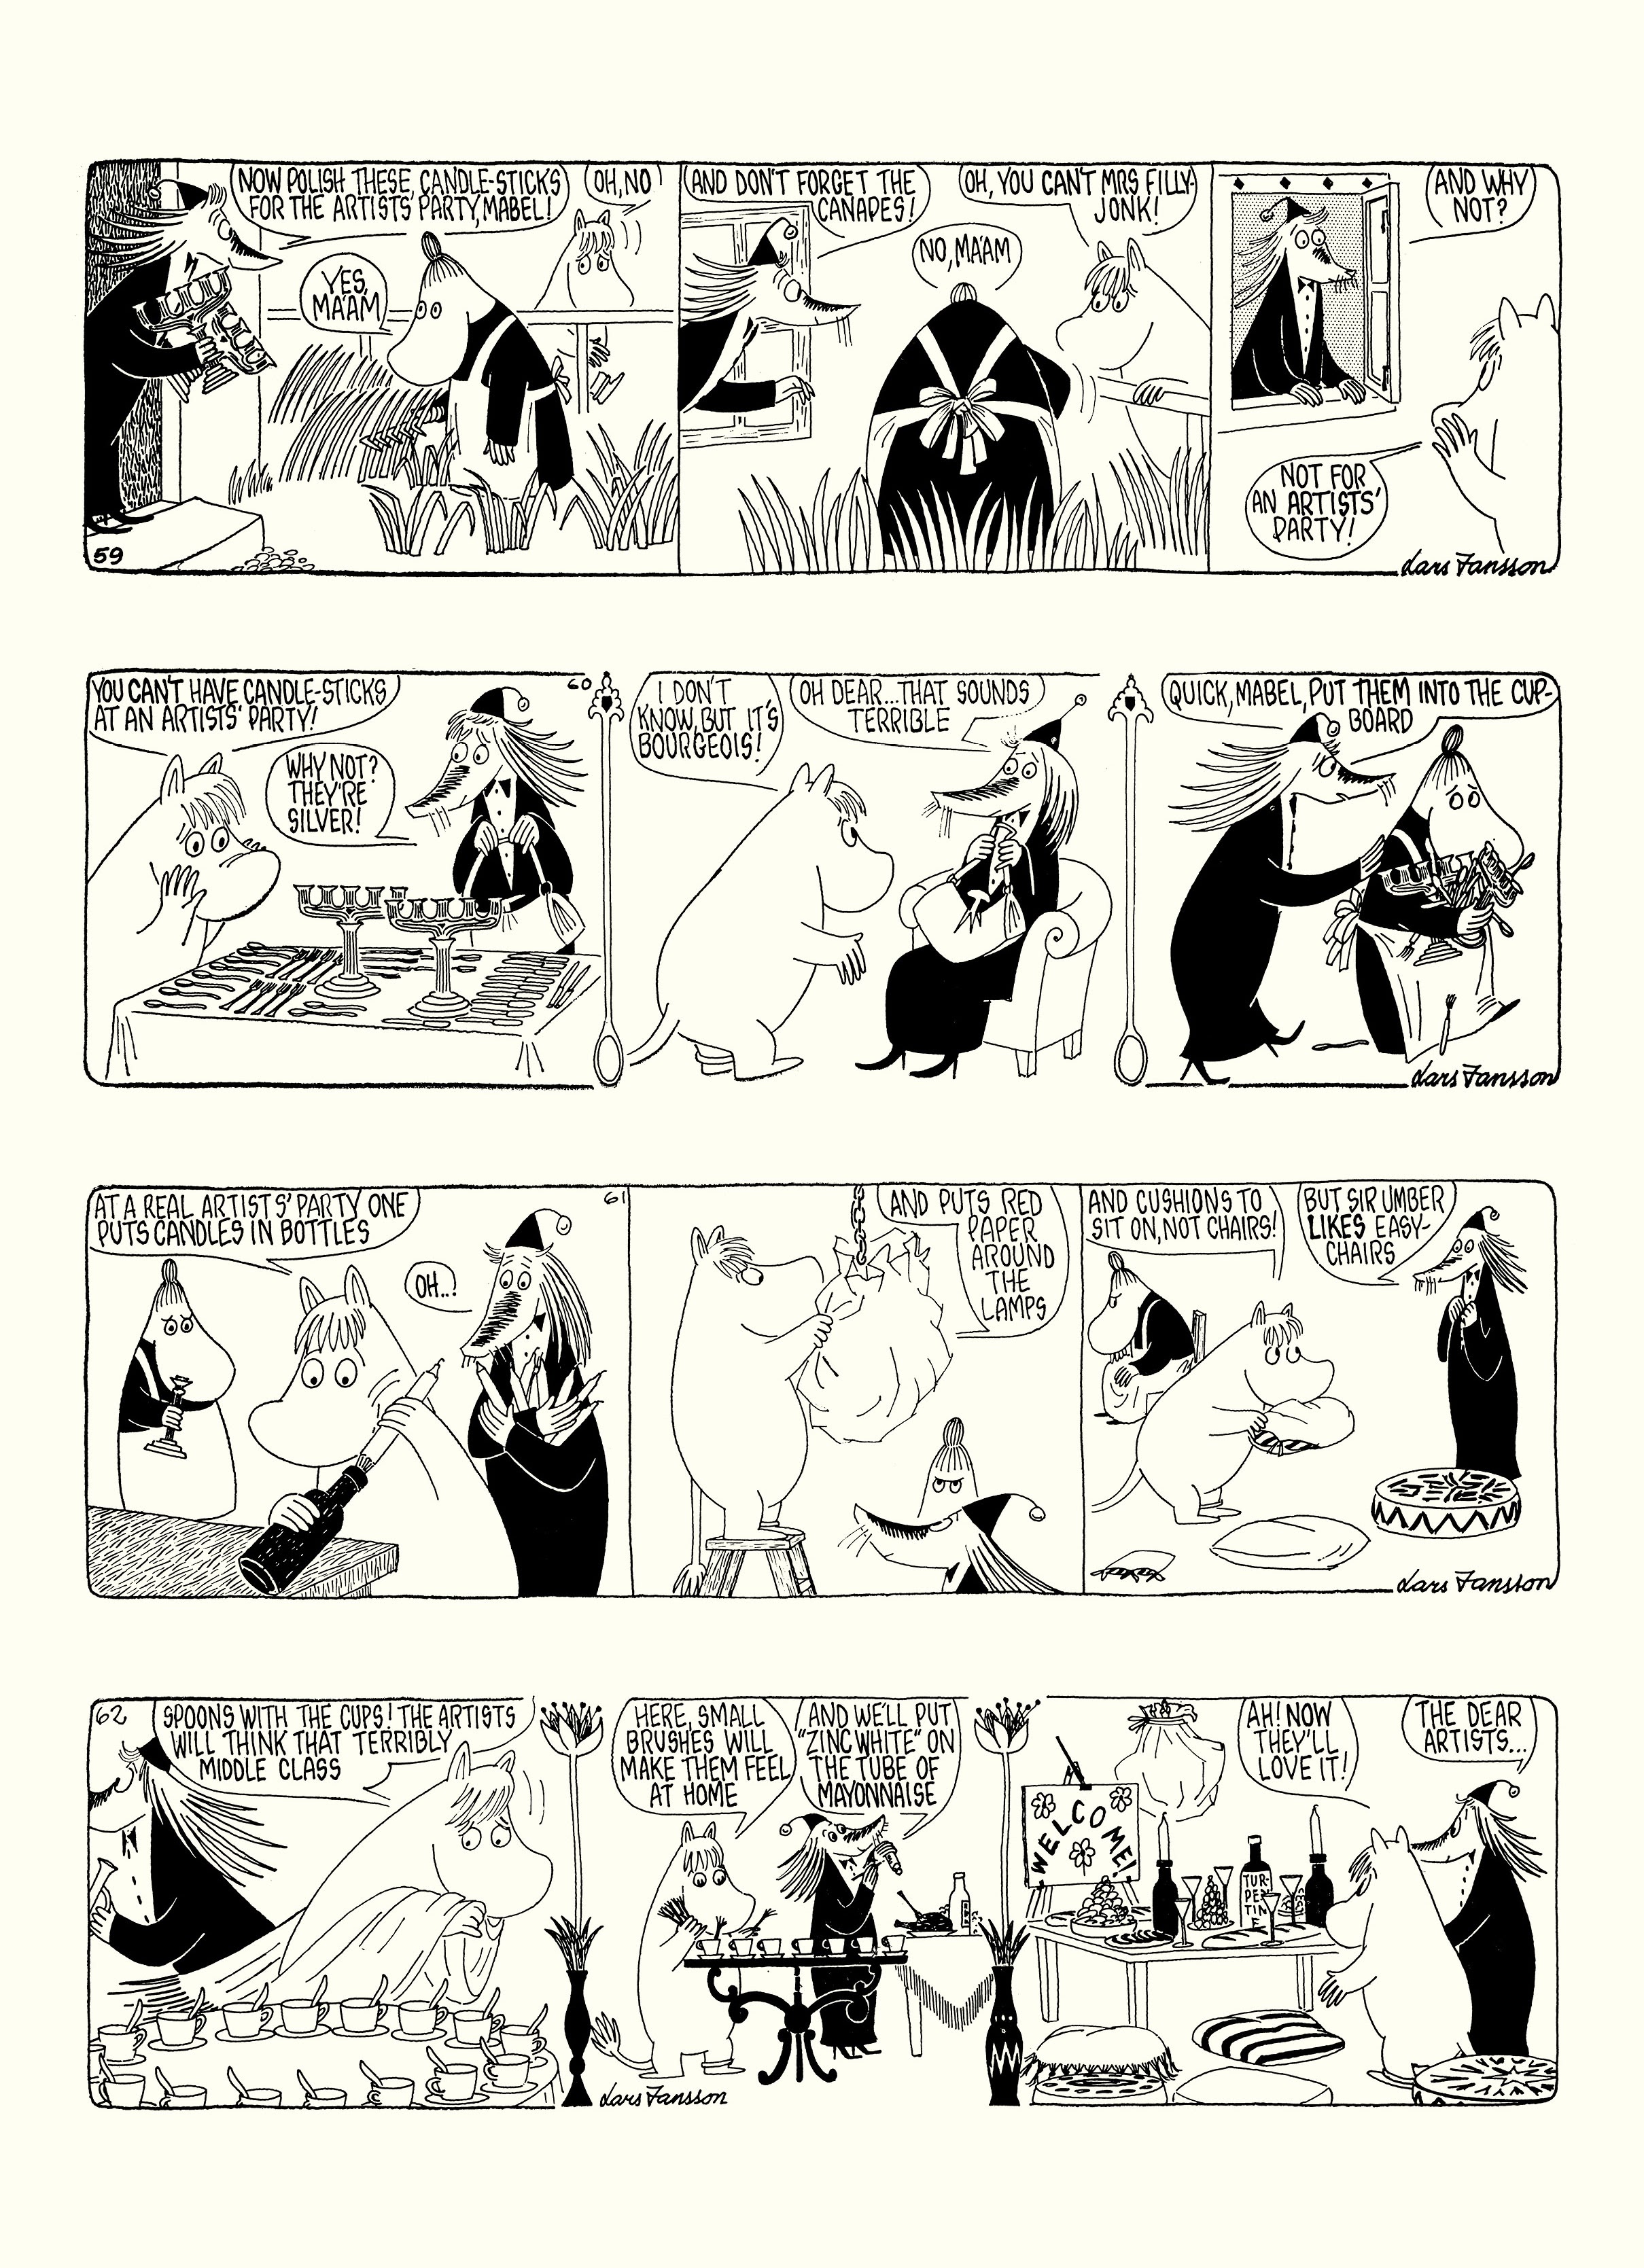 Read online Moomin: The Complete Lars Jansson Comic Strip comic -  Issue # TPB 8 - 42